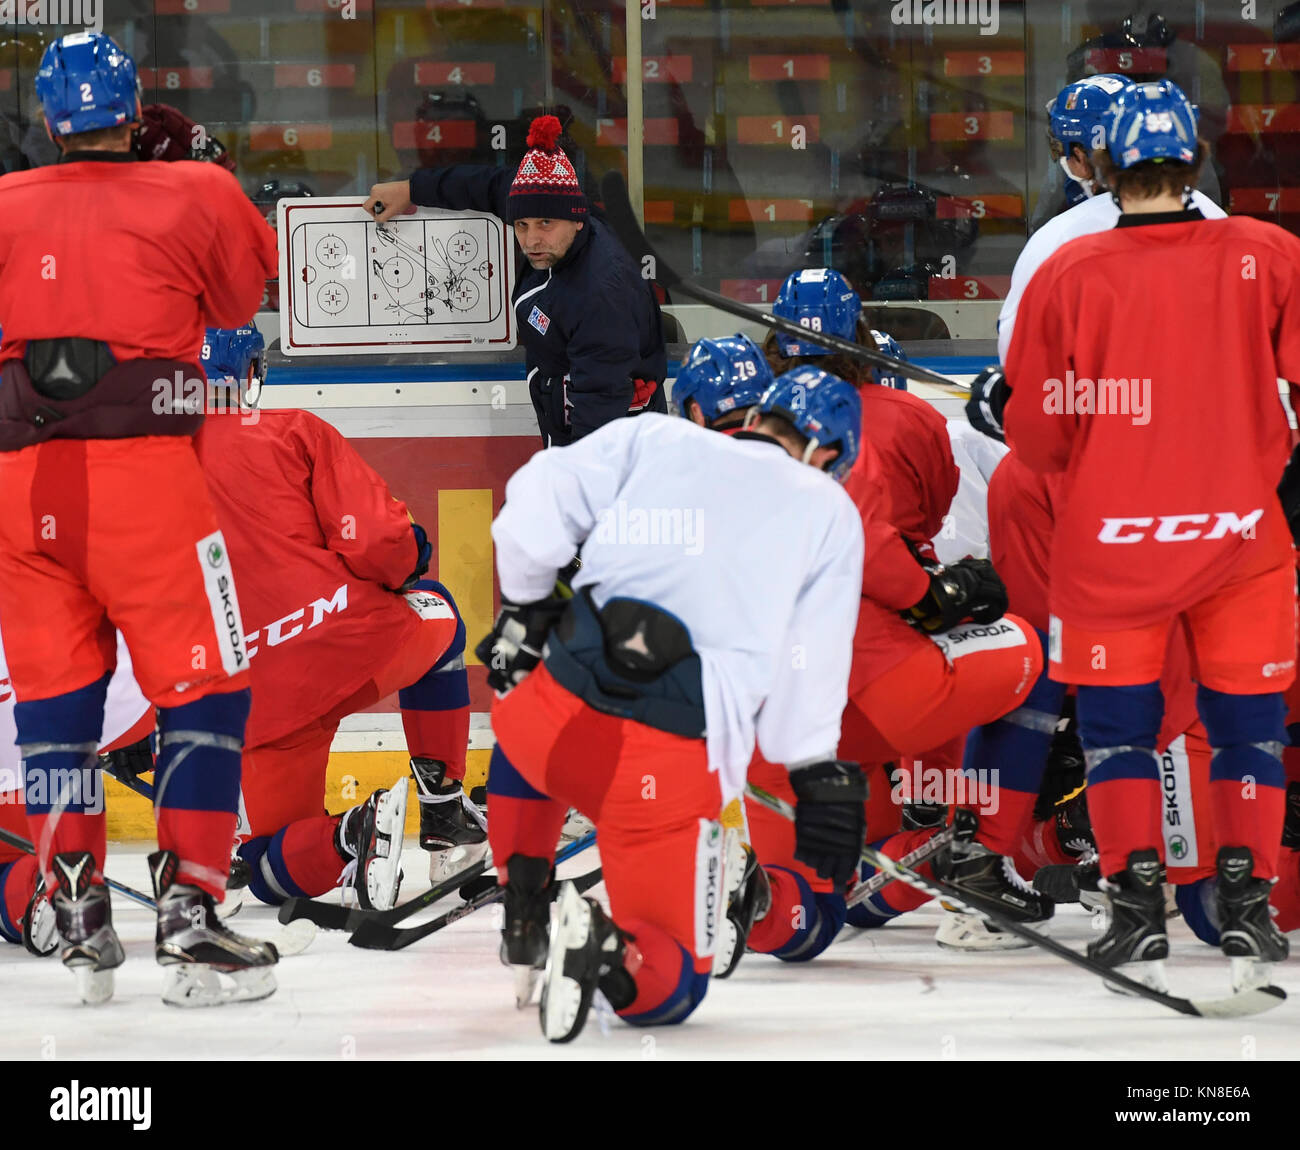 Czech National Team's Head Coach Josef Jandac instruct players during a training session prior to the Channel One Cup tournament of Euro Hockey Tour in Prague, Czech Republic, December 11, 2017. CTK Photo/Michal Krumphanzl) Stock Photo